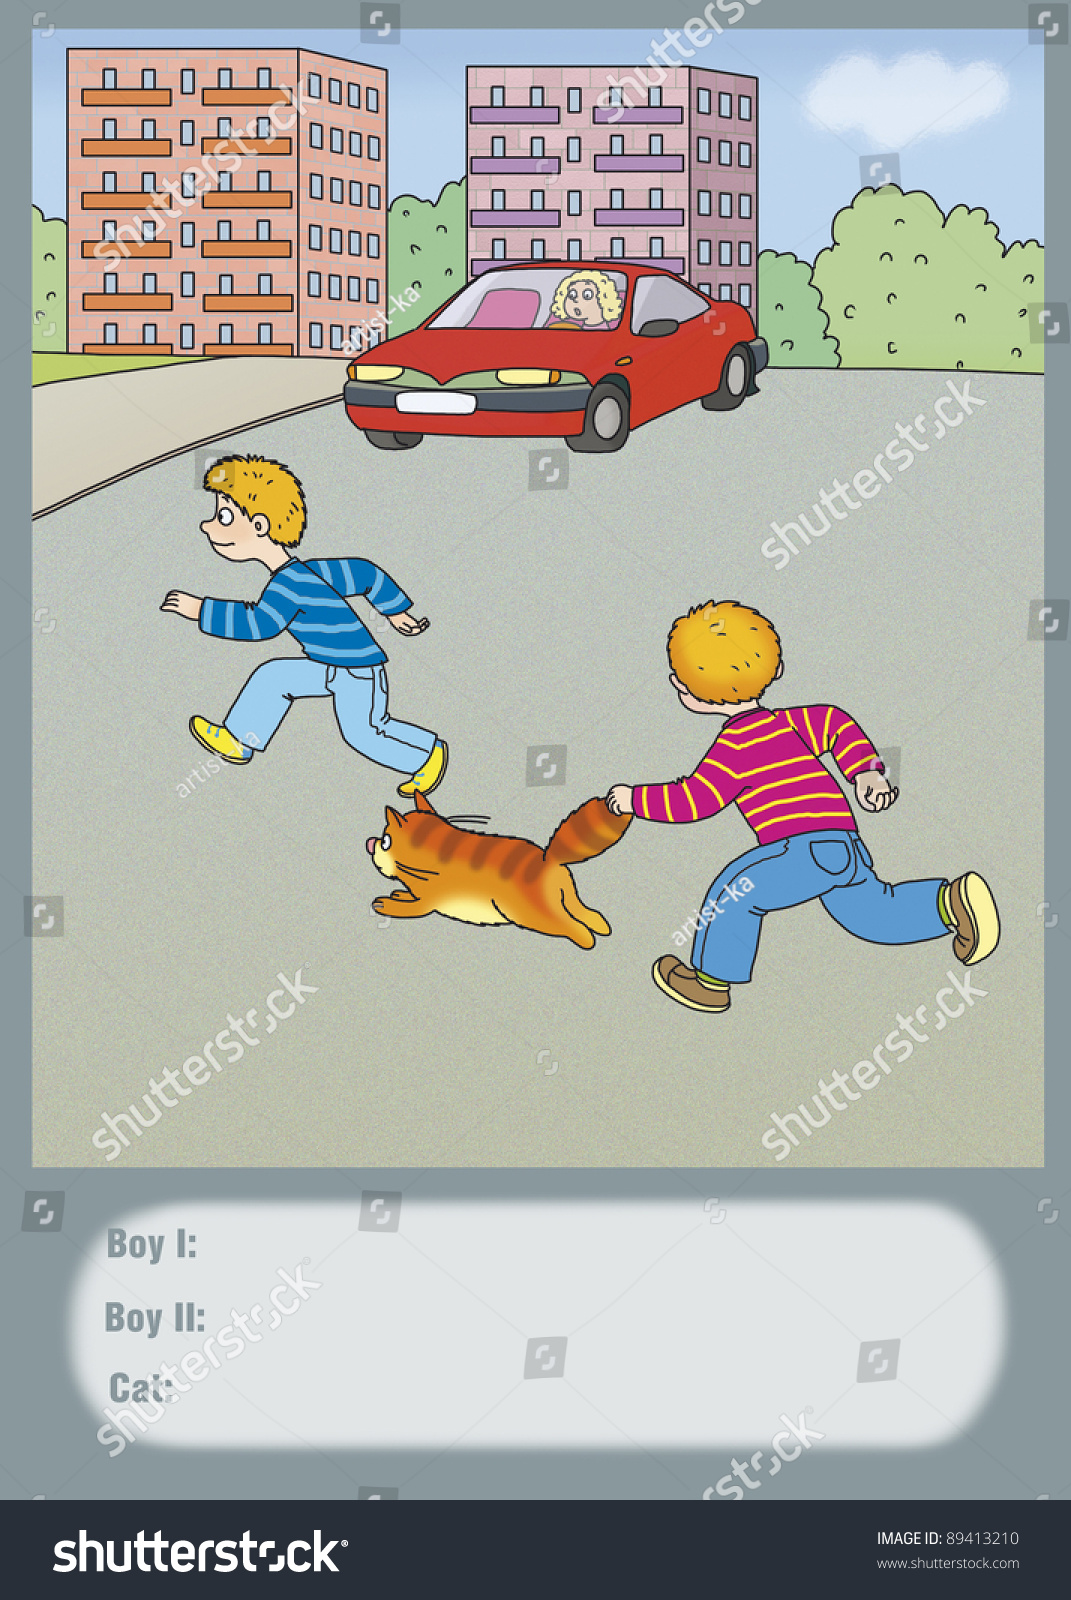 Boys And A Cat Run Across The Road Stock Photo 89413210 : Shutterstock